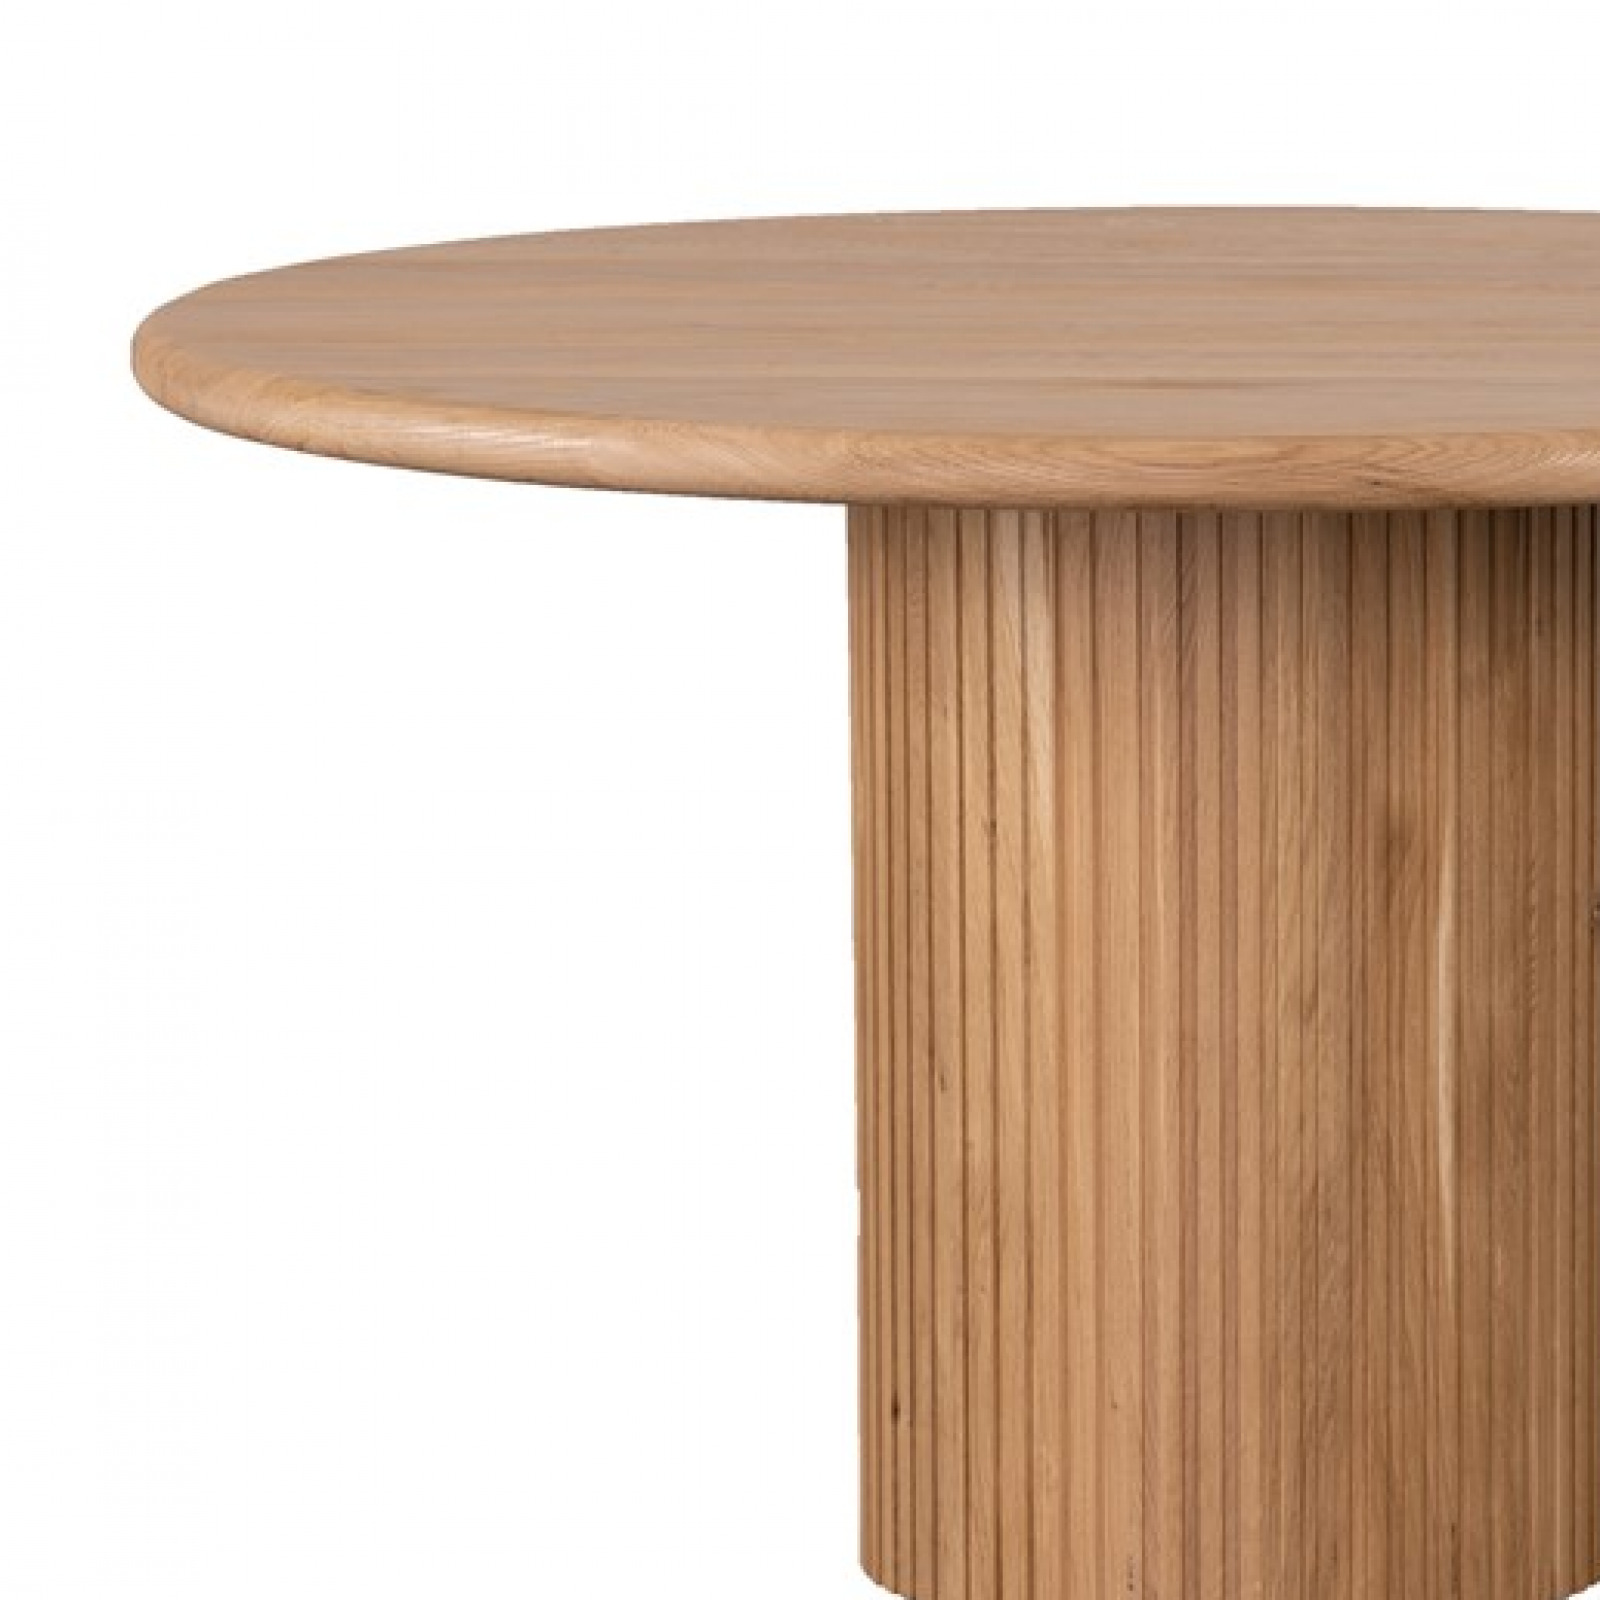 Wilmington dining table 